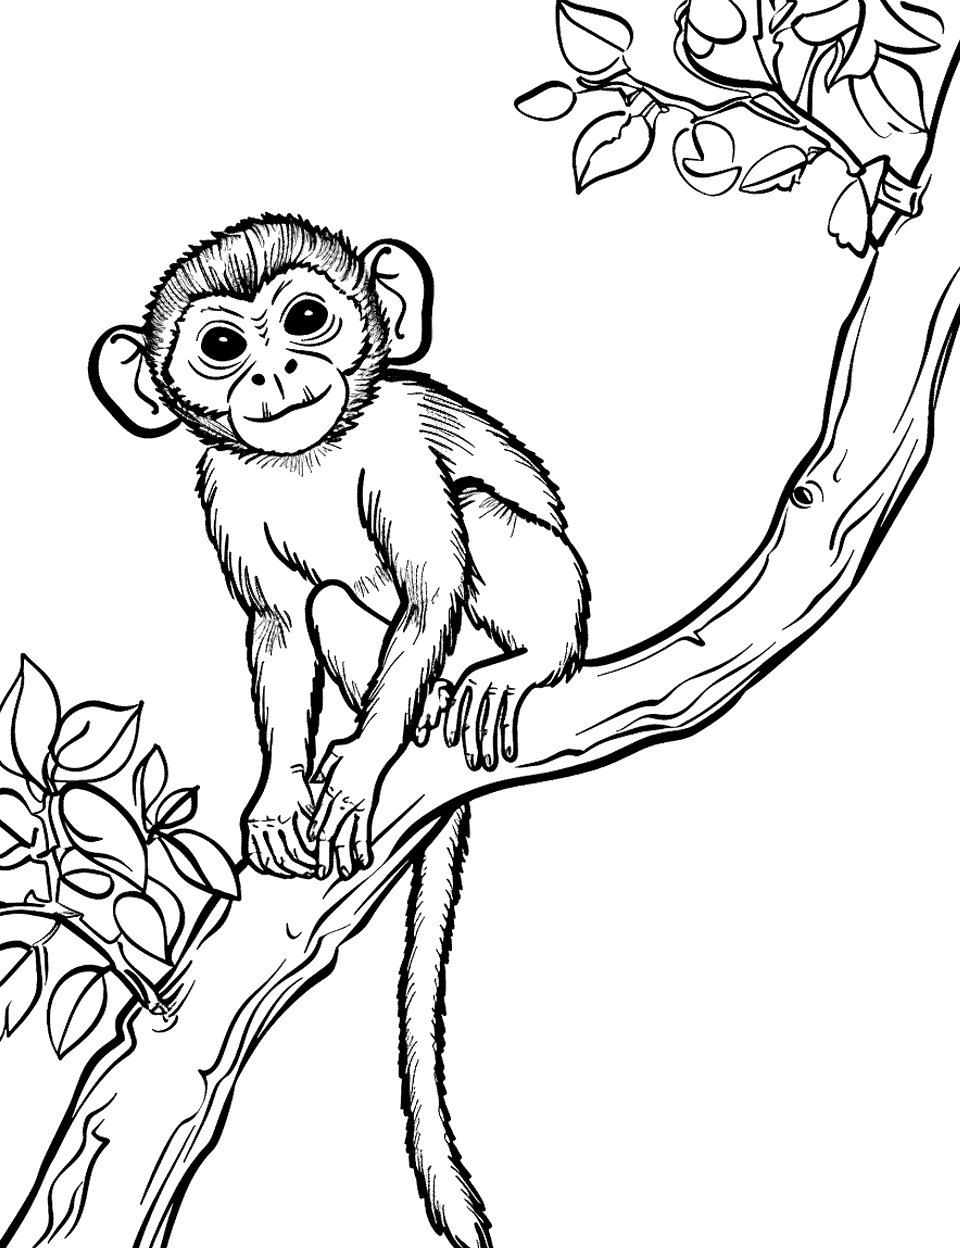 Squirrel Monkey on a Limb Coloring Page - A squirrel monkey perched alertly on a slender tree limb.